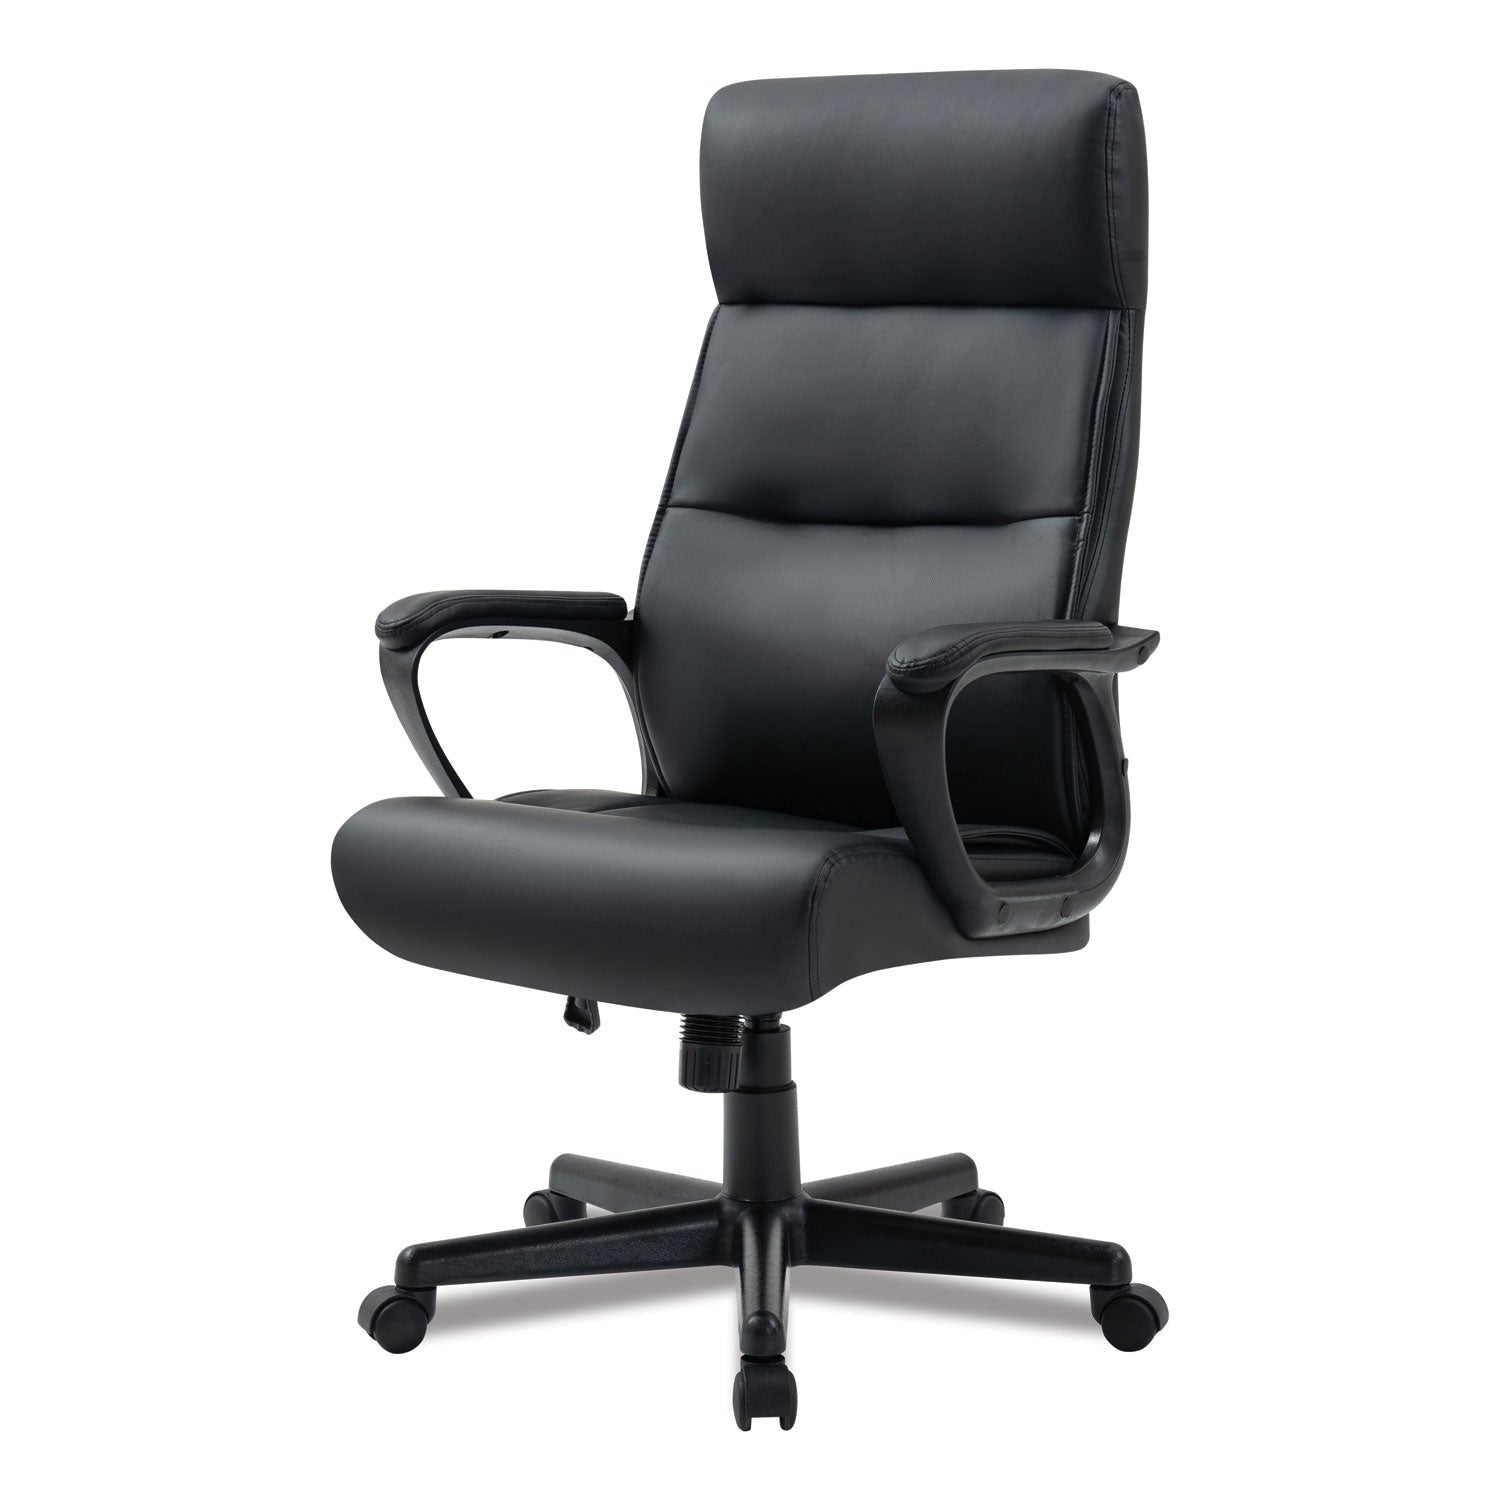 alera-oxnam-series-high-back-task-chair-supports-up-to-275-lbs-1756-to-2138-seat-height-black-seat-back-black-base_aleon41b19 - 3